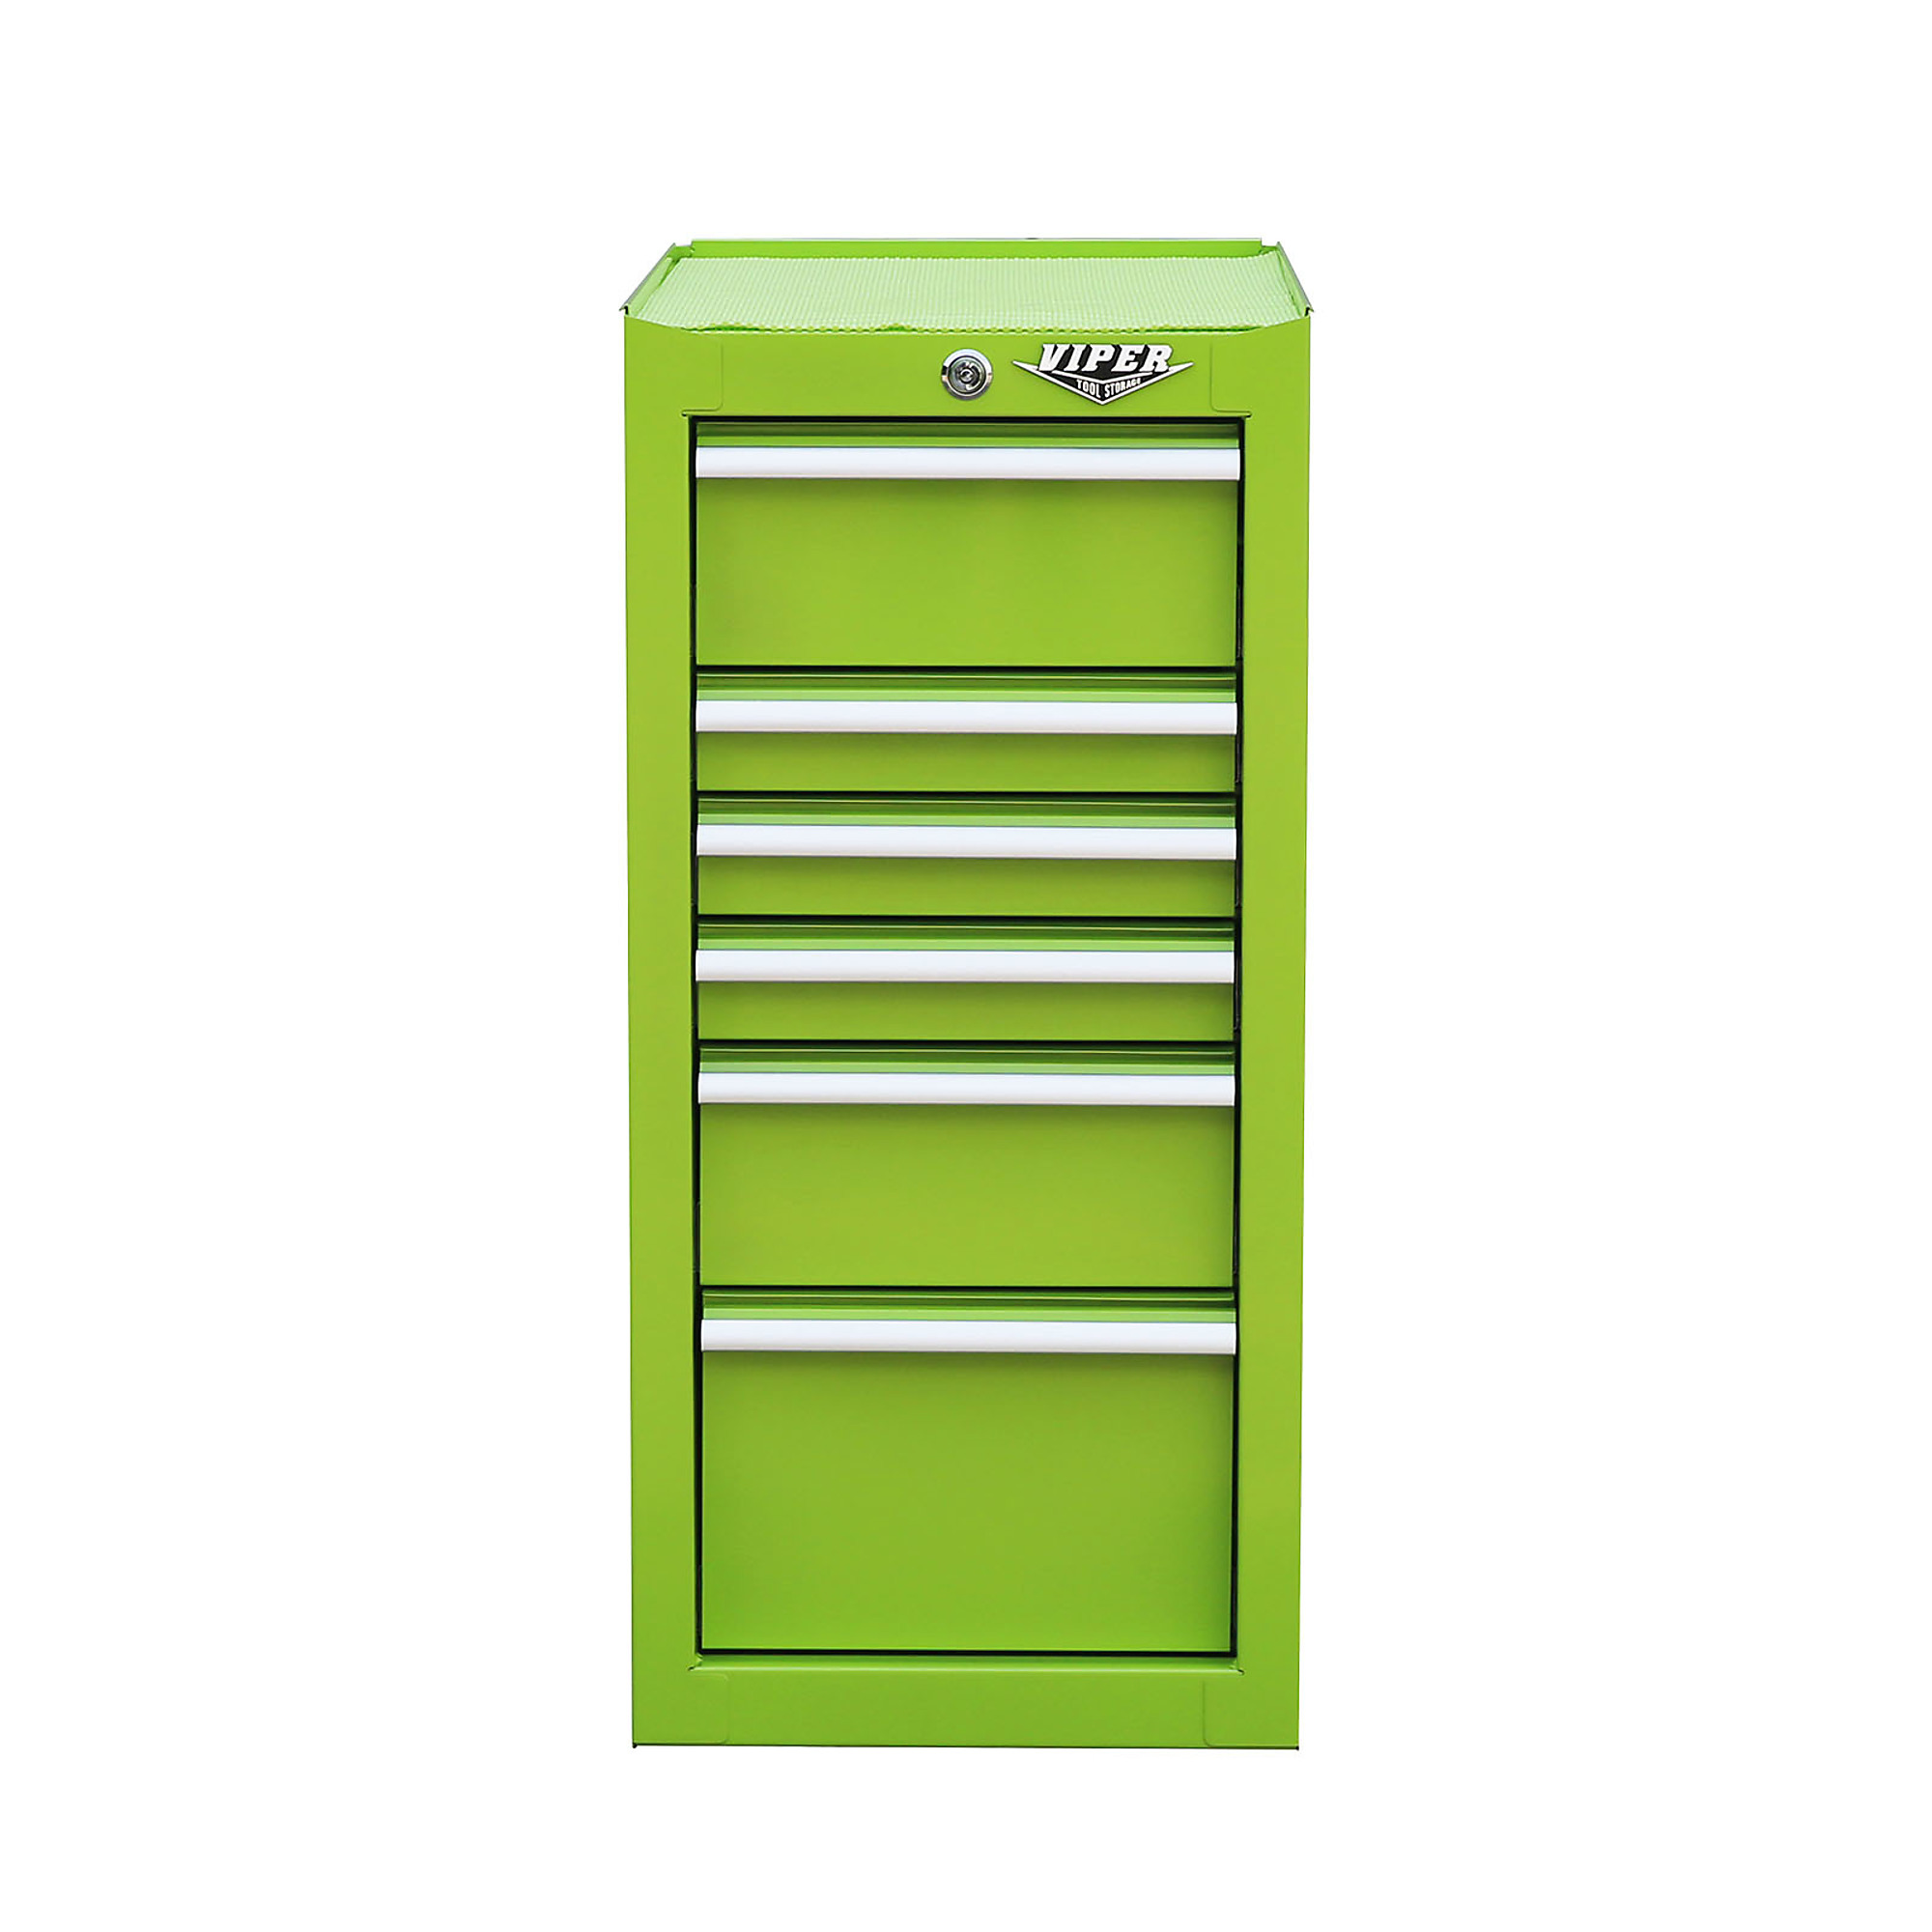 Viper Tool Storage, 6-Drawer Steel Side Cabinet, Lime Green, Width 16 in, Height 34.38 in, Color Lime, Model V1606SCLG